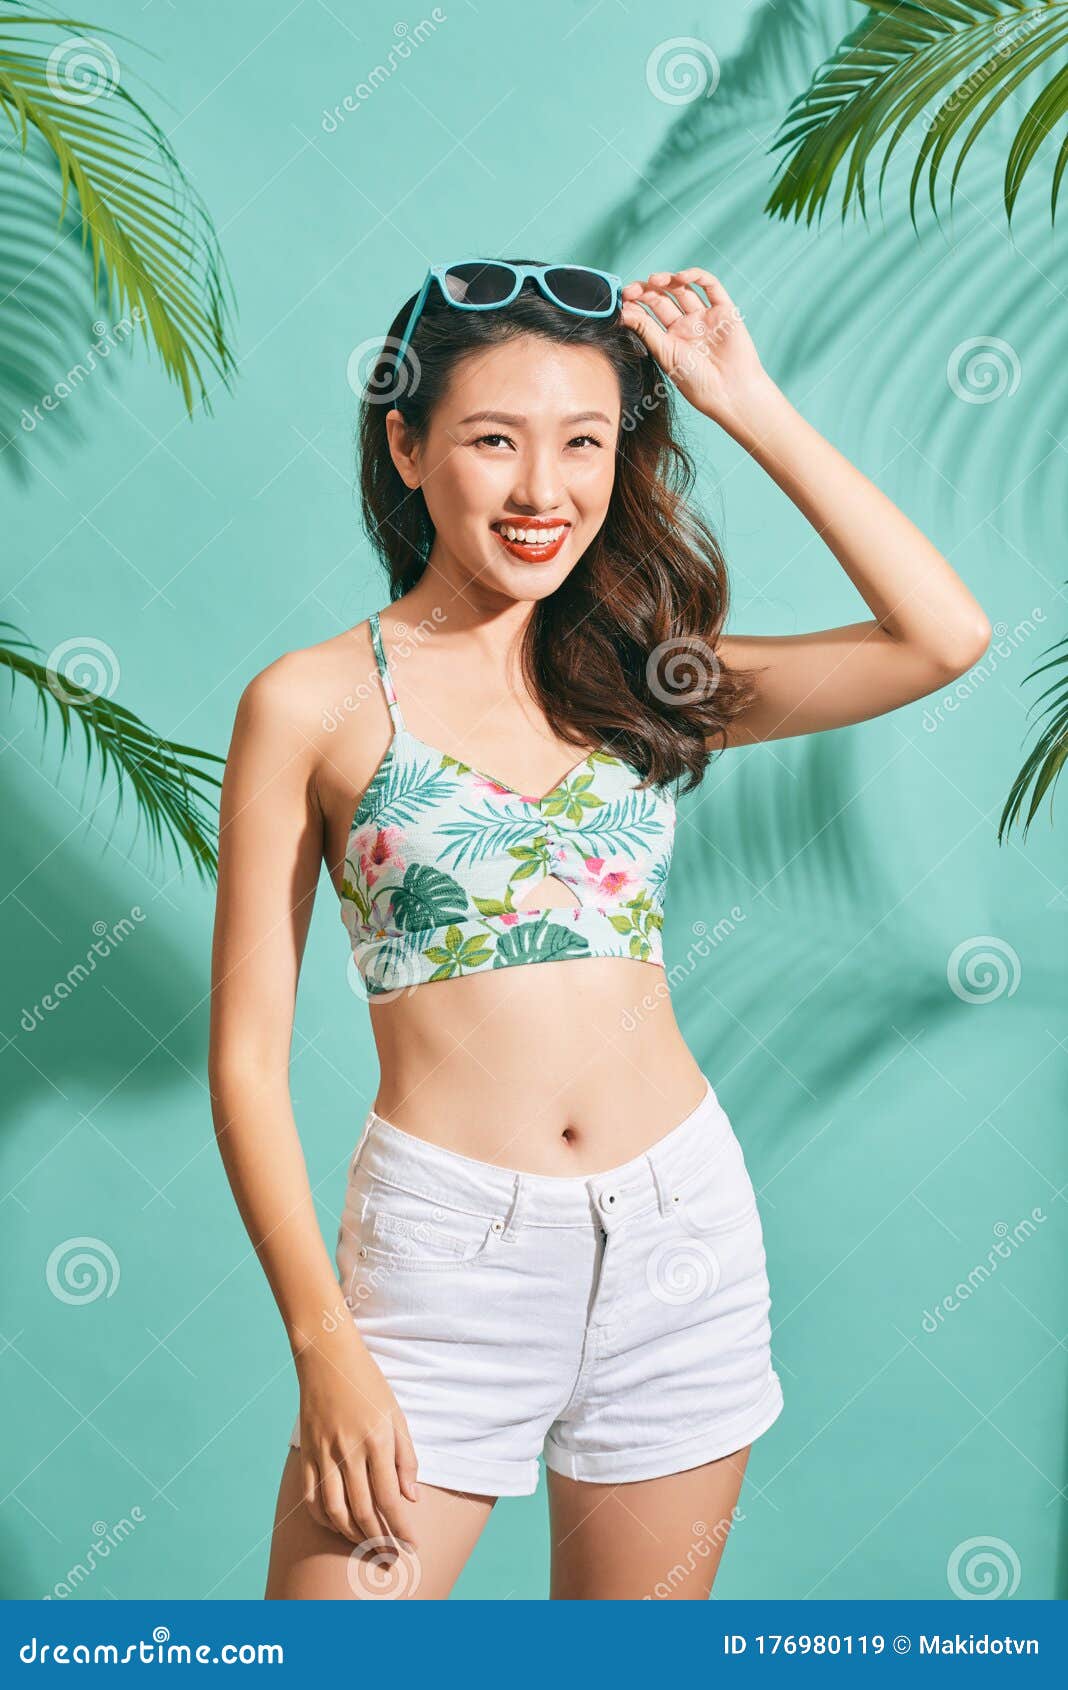 Oriental with biggest bumpers posing in shirt and bikini